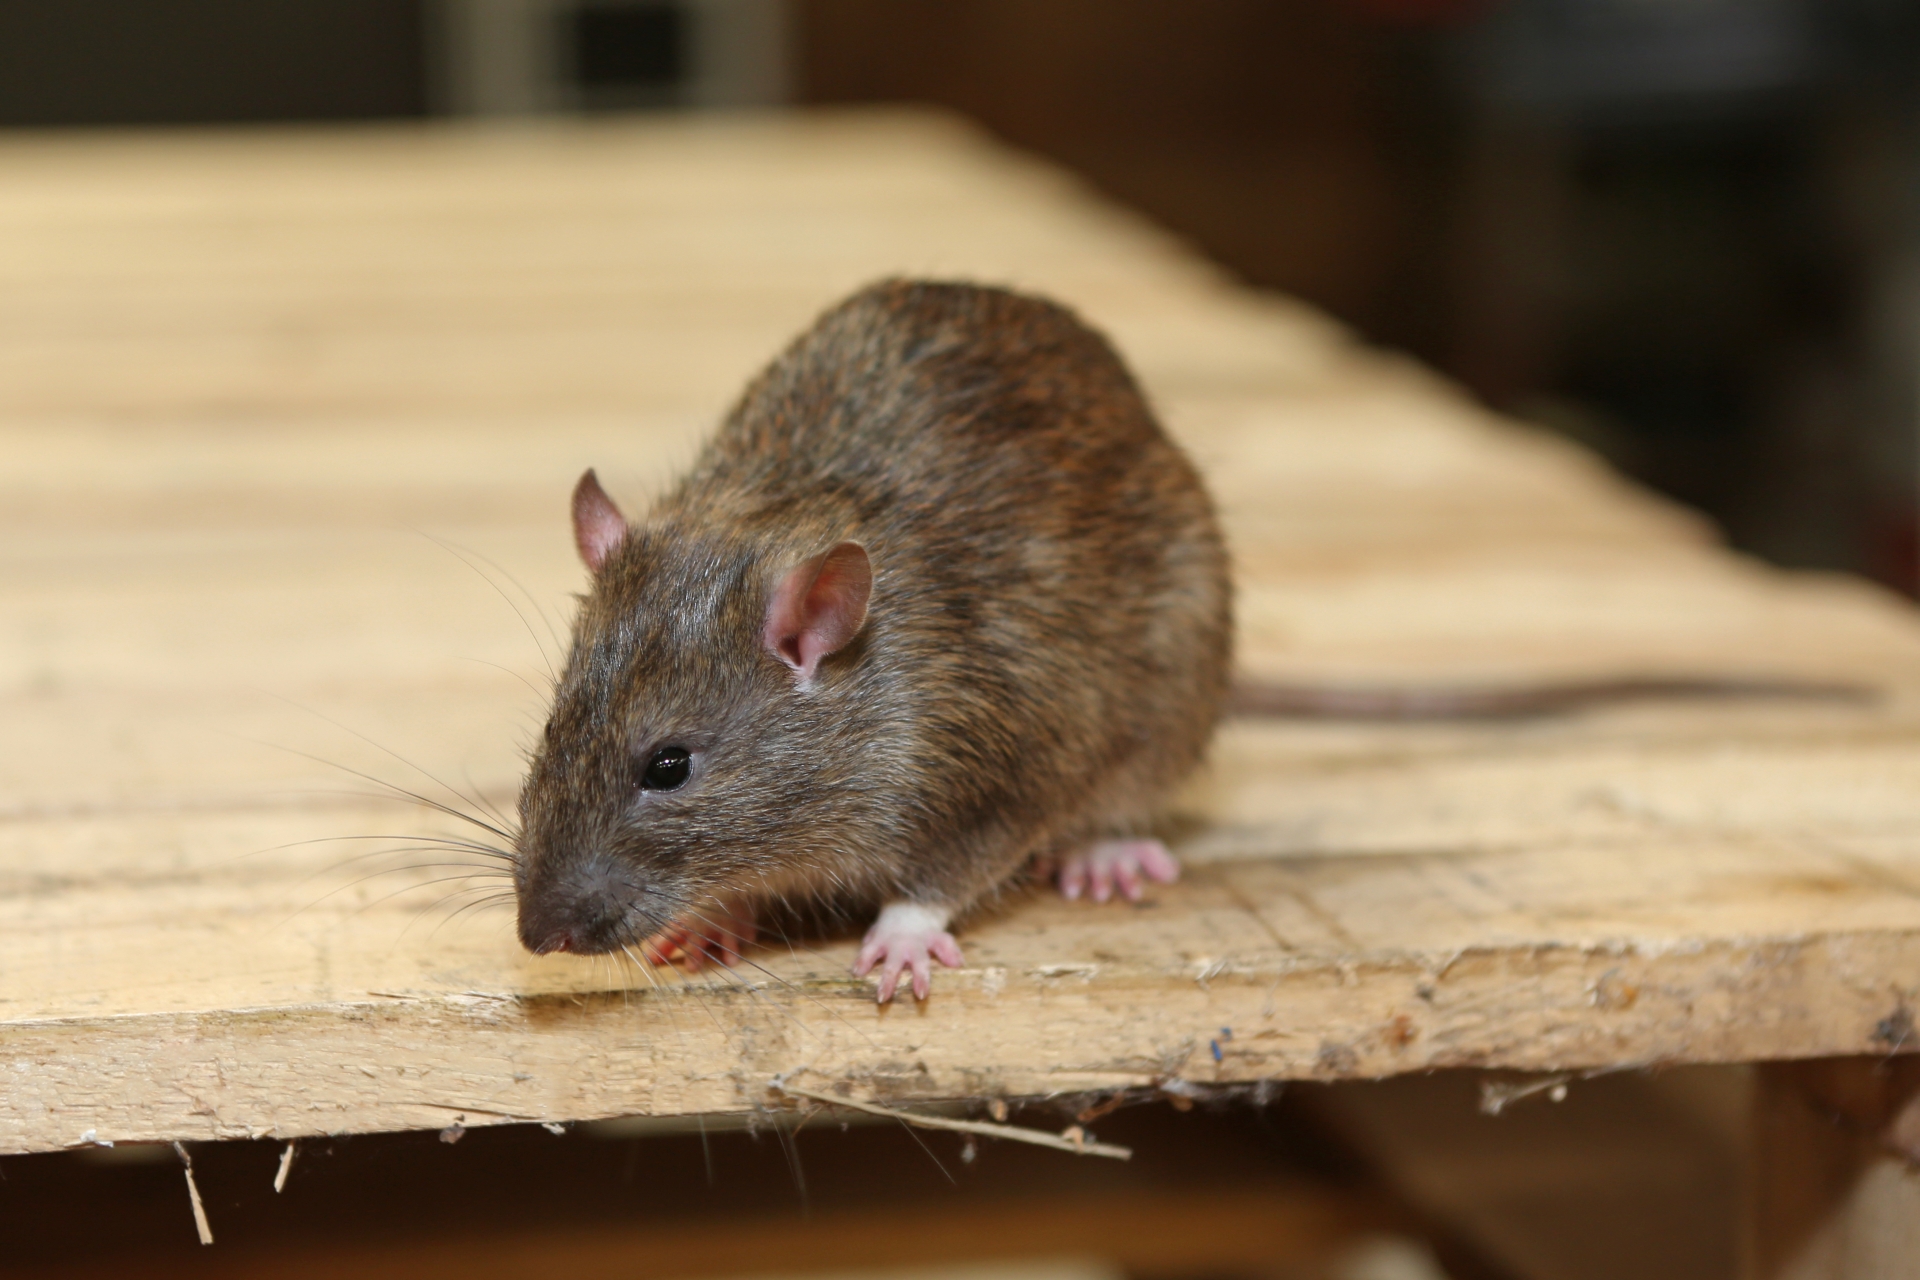 Rat Infestation, Pest Control in Cockfosters, East Barnet, EN4. Call Now 020 8166 9746